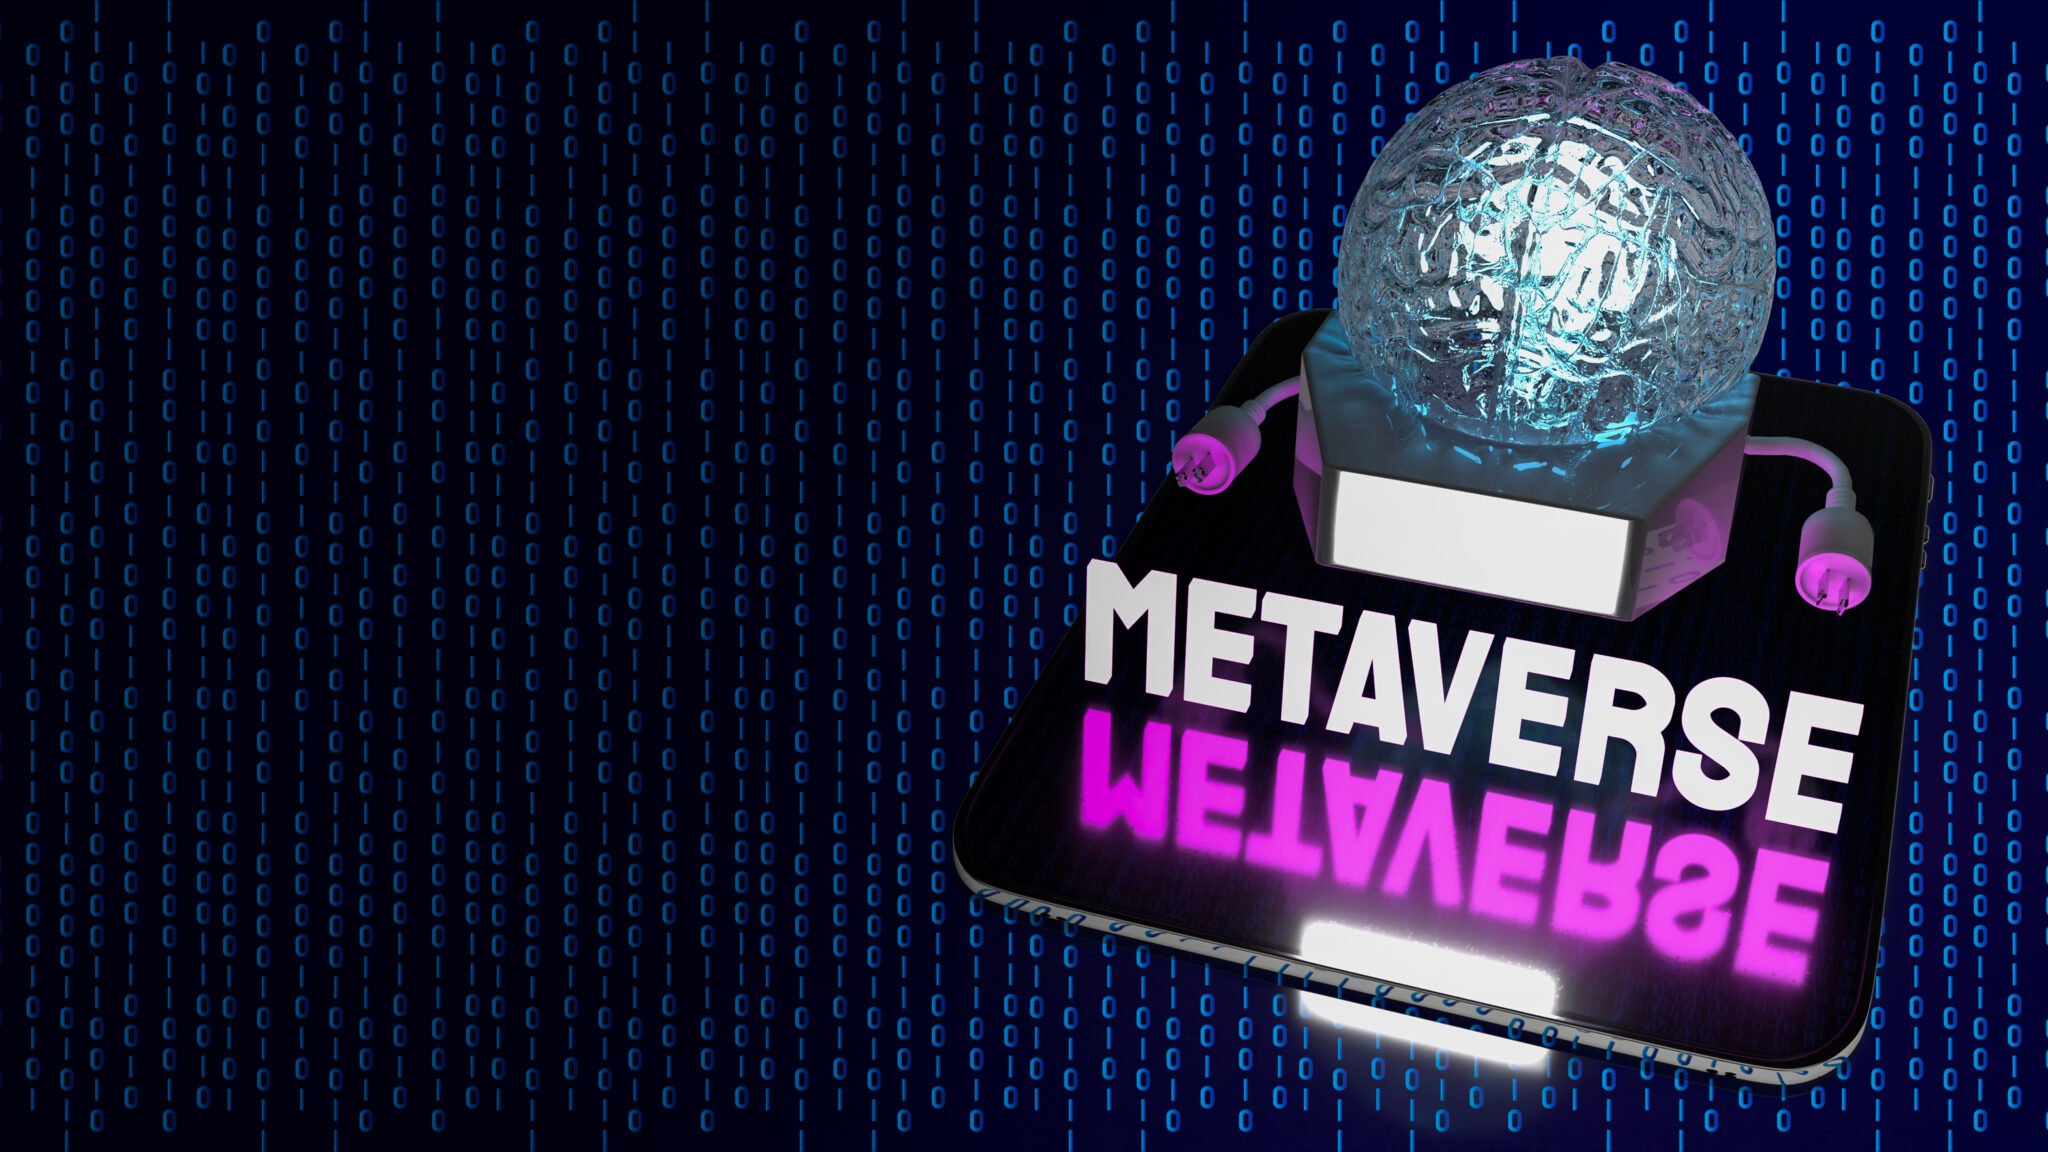 tablet brain for metaverse or technology concept 3d rendering